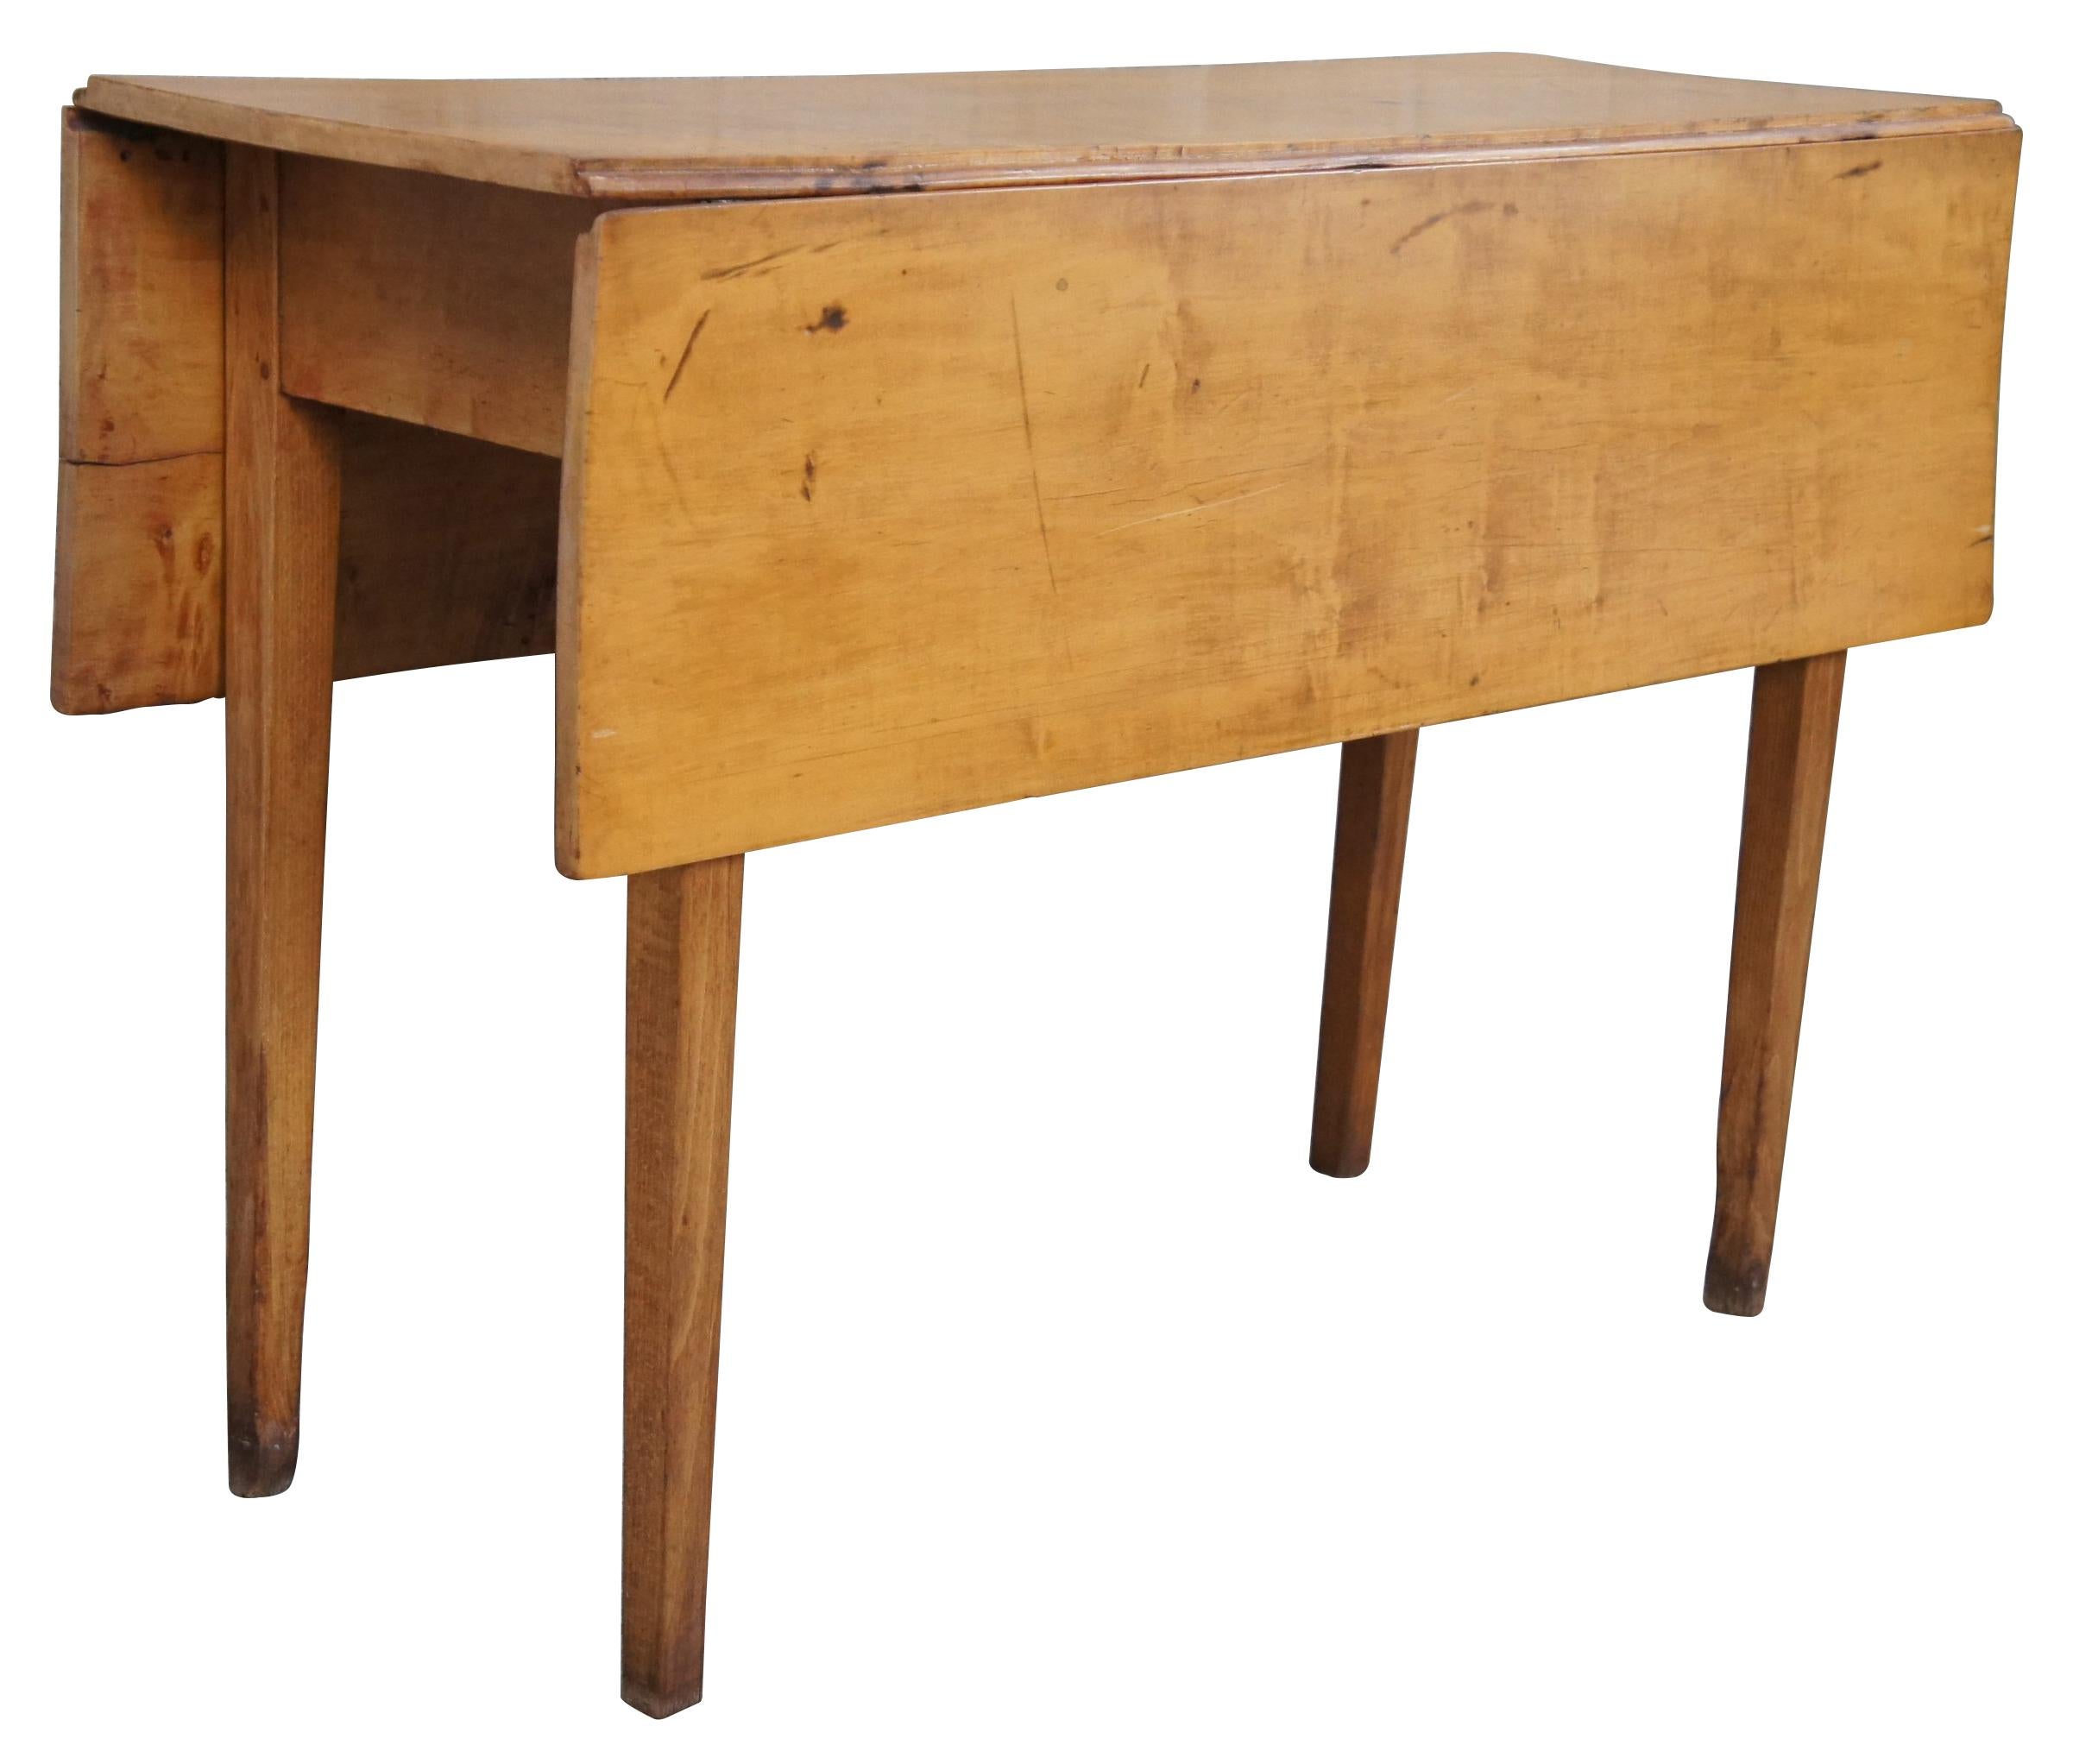 An antique 19th century tulipwood drop leaf table. Great for use as a breakfast or console table. Features a rectangular form supported by square tapered legs. Measure: 42